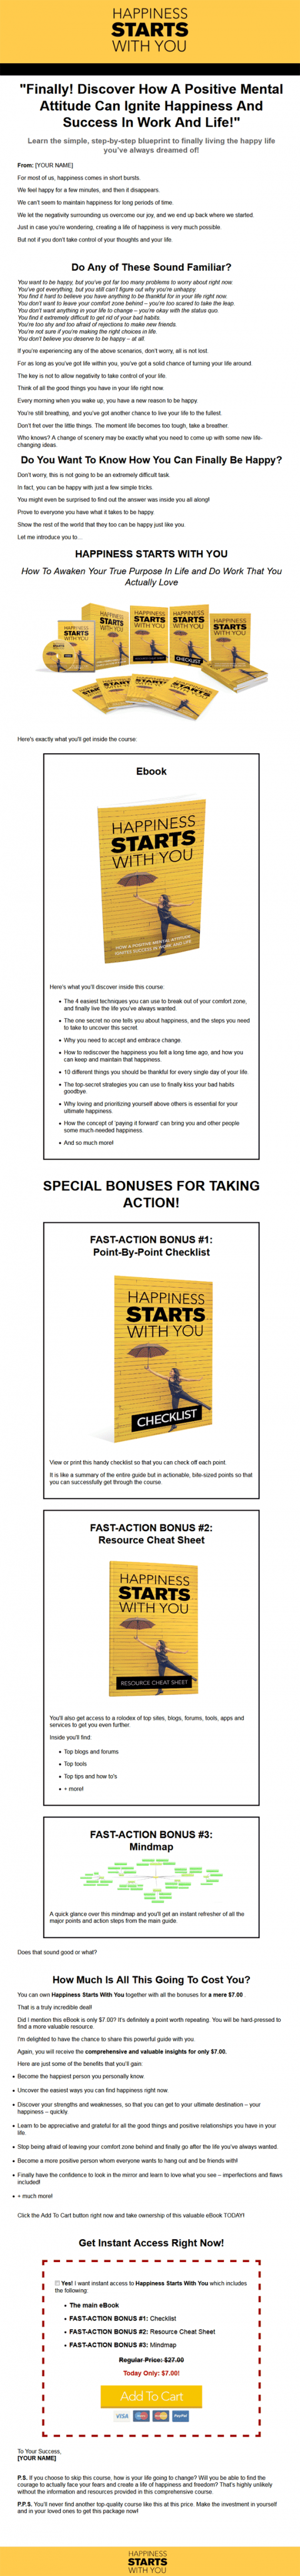 Happiness Starts With You Ebook and Videos MRR